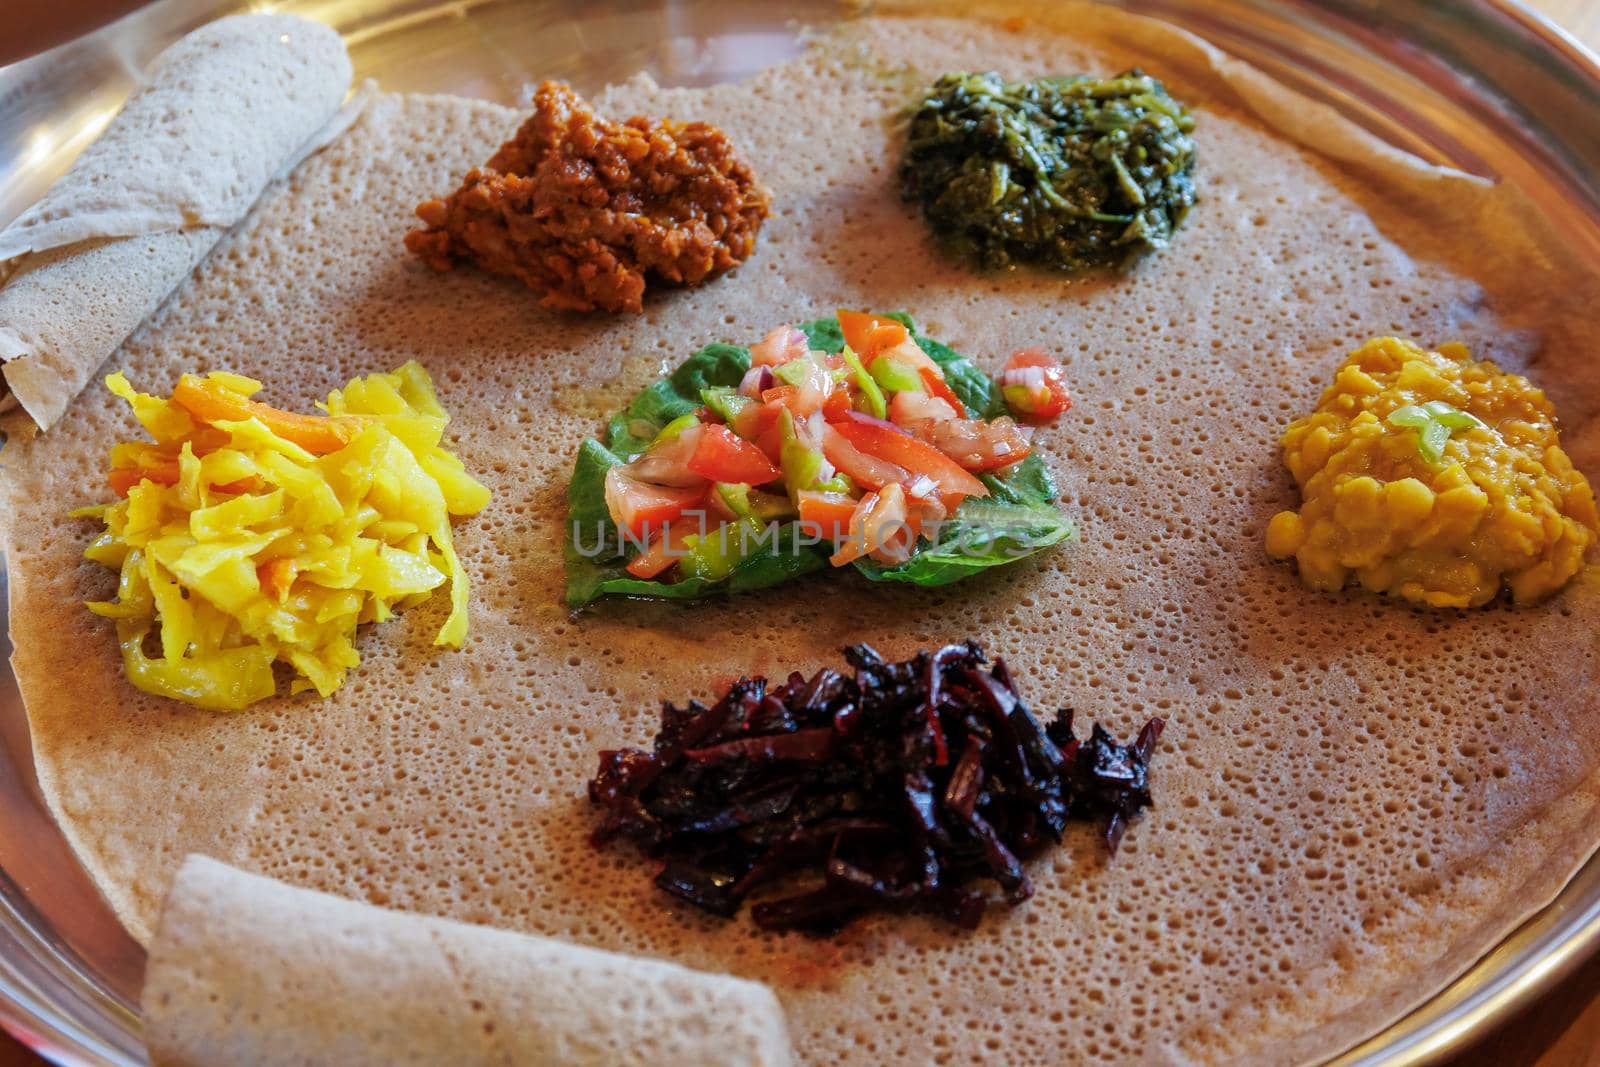 Injera served with vegetables and lentils. by magicbones